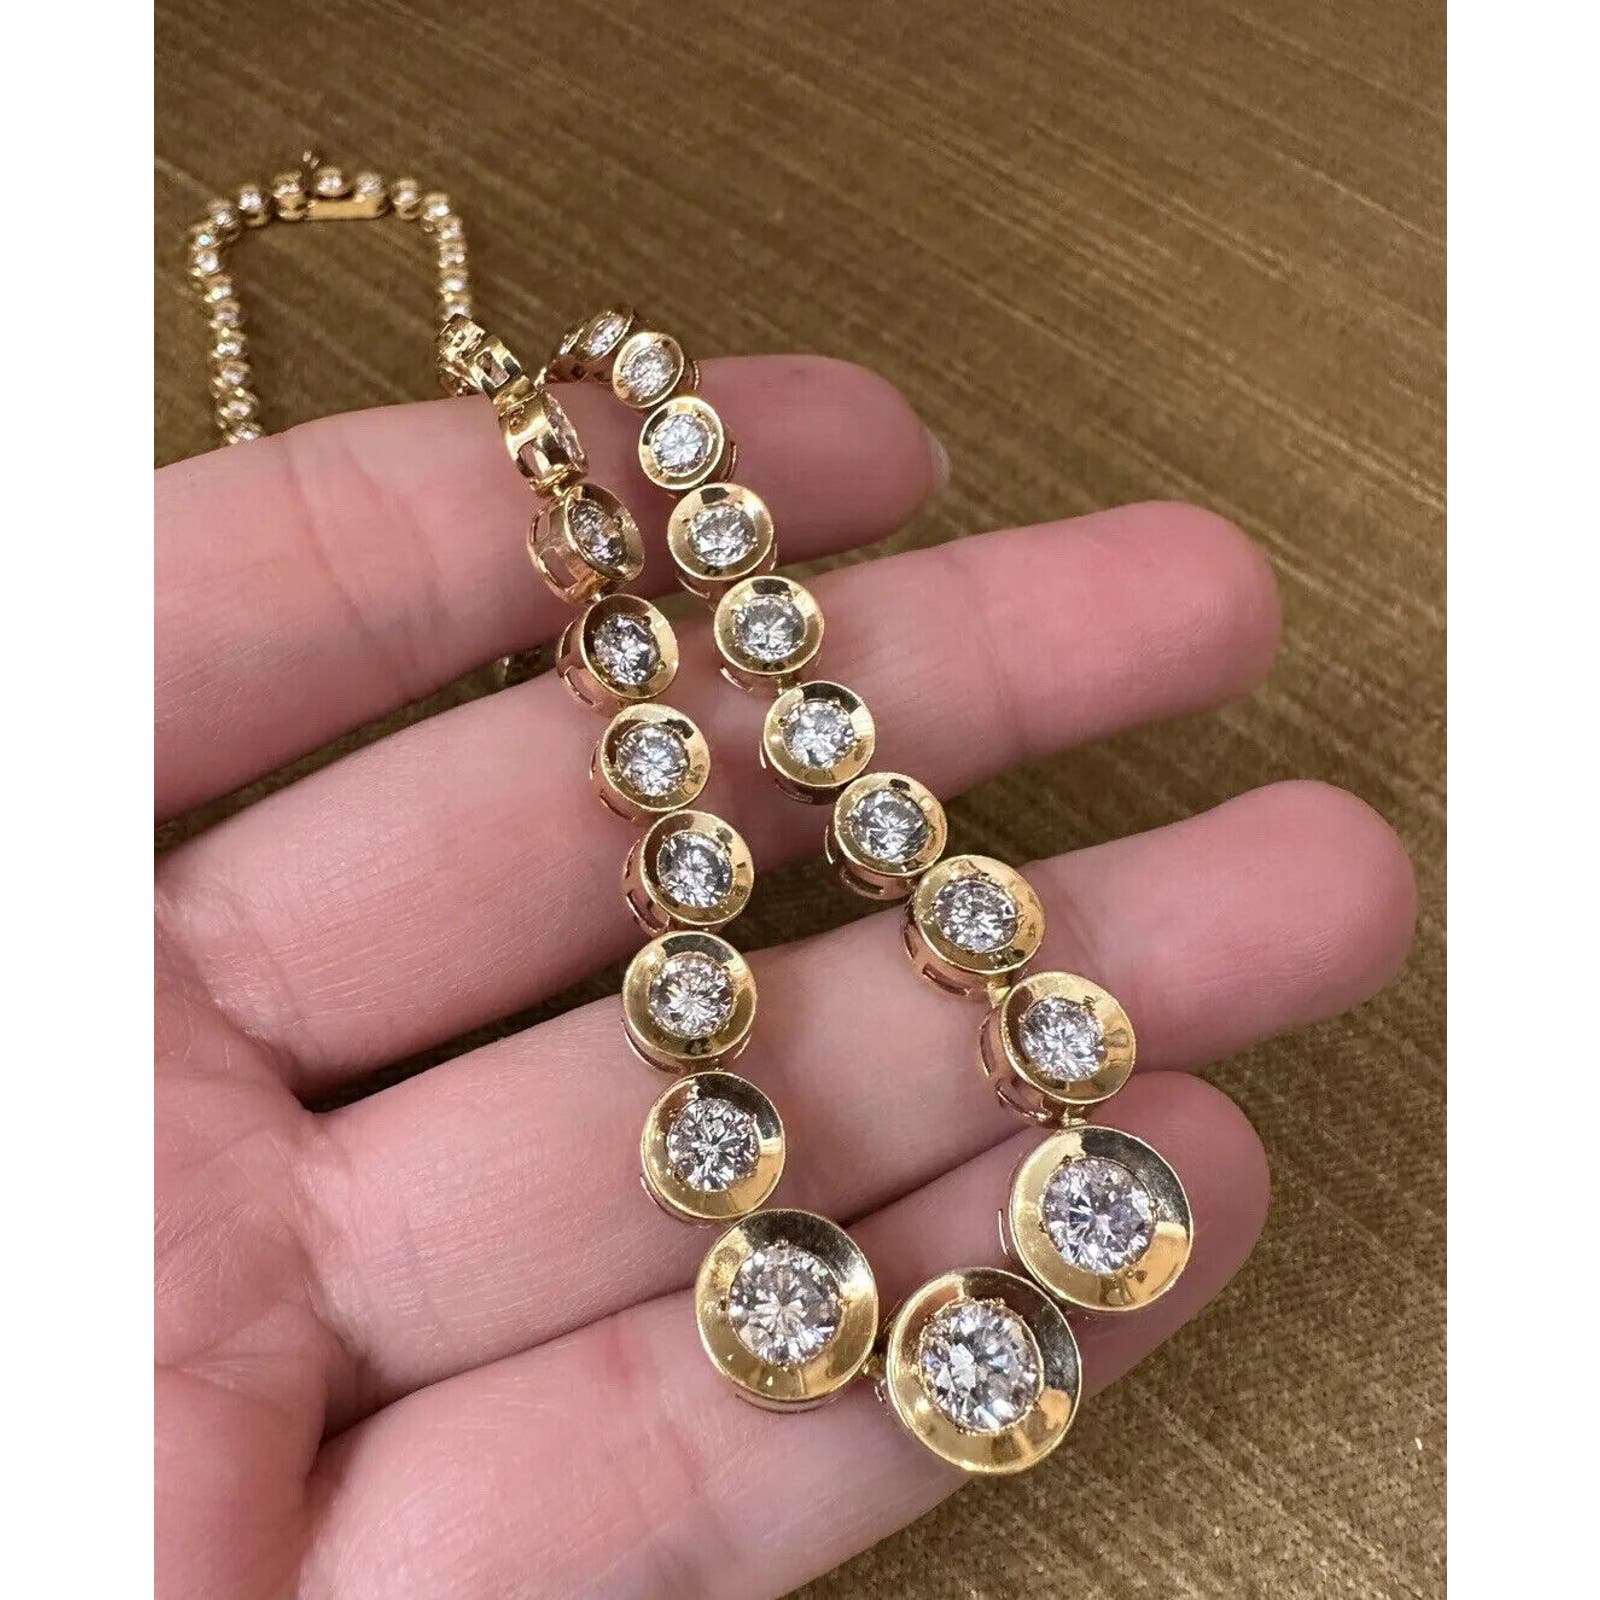 10.00 carats TW Diamond Tennis Necklace in 18k Yellow Gold 15 5/8" - HM2454ZI